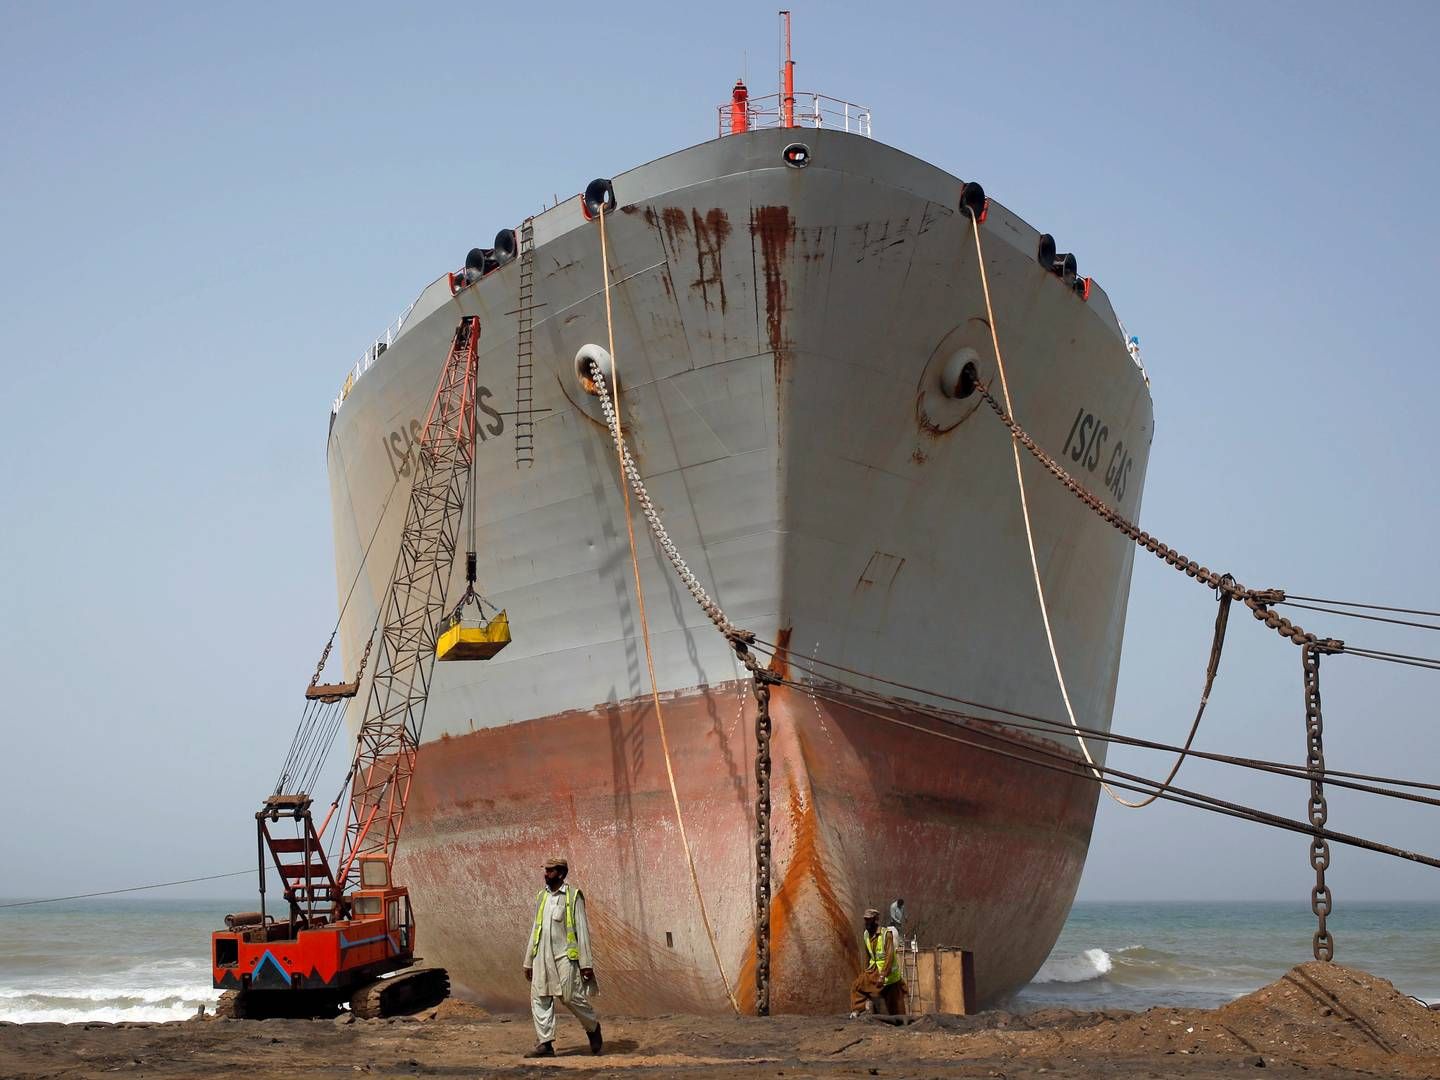 85% of ships sent to scrapping end up on beaches in India, Pakistan and Bangladesh. | Photo: Akhtar Soomro/Reuters/Ritzau Scanpix